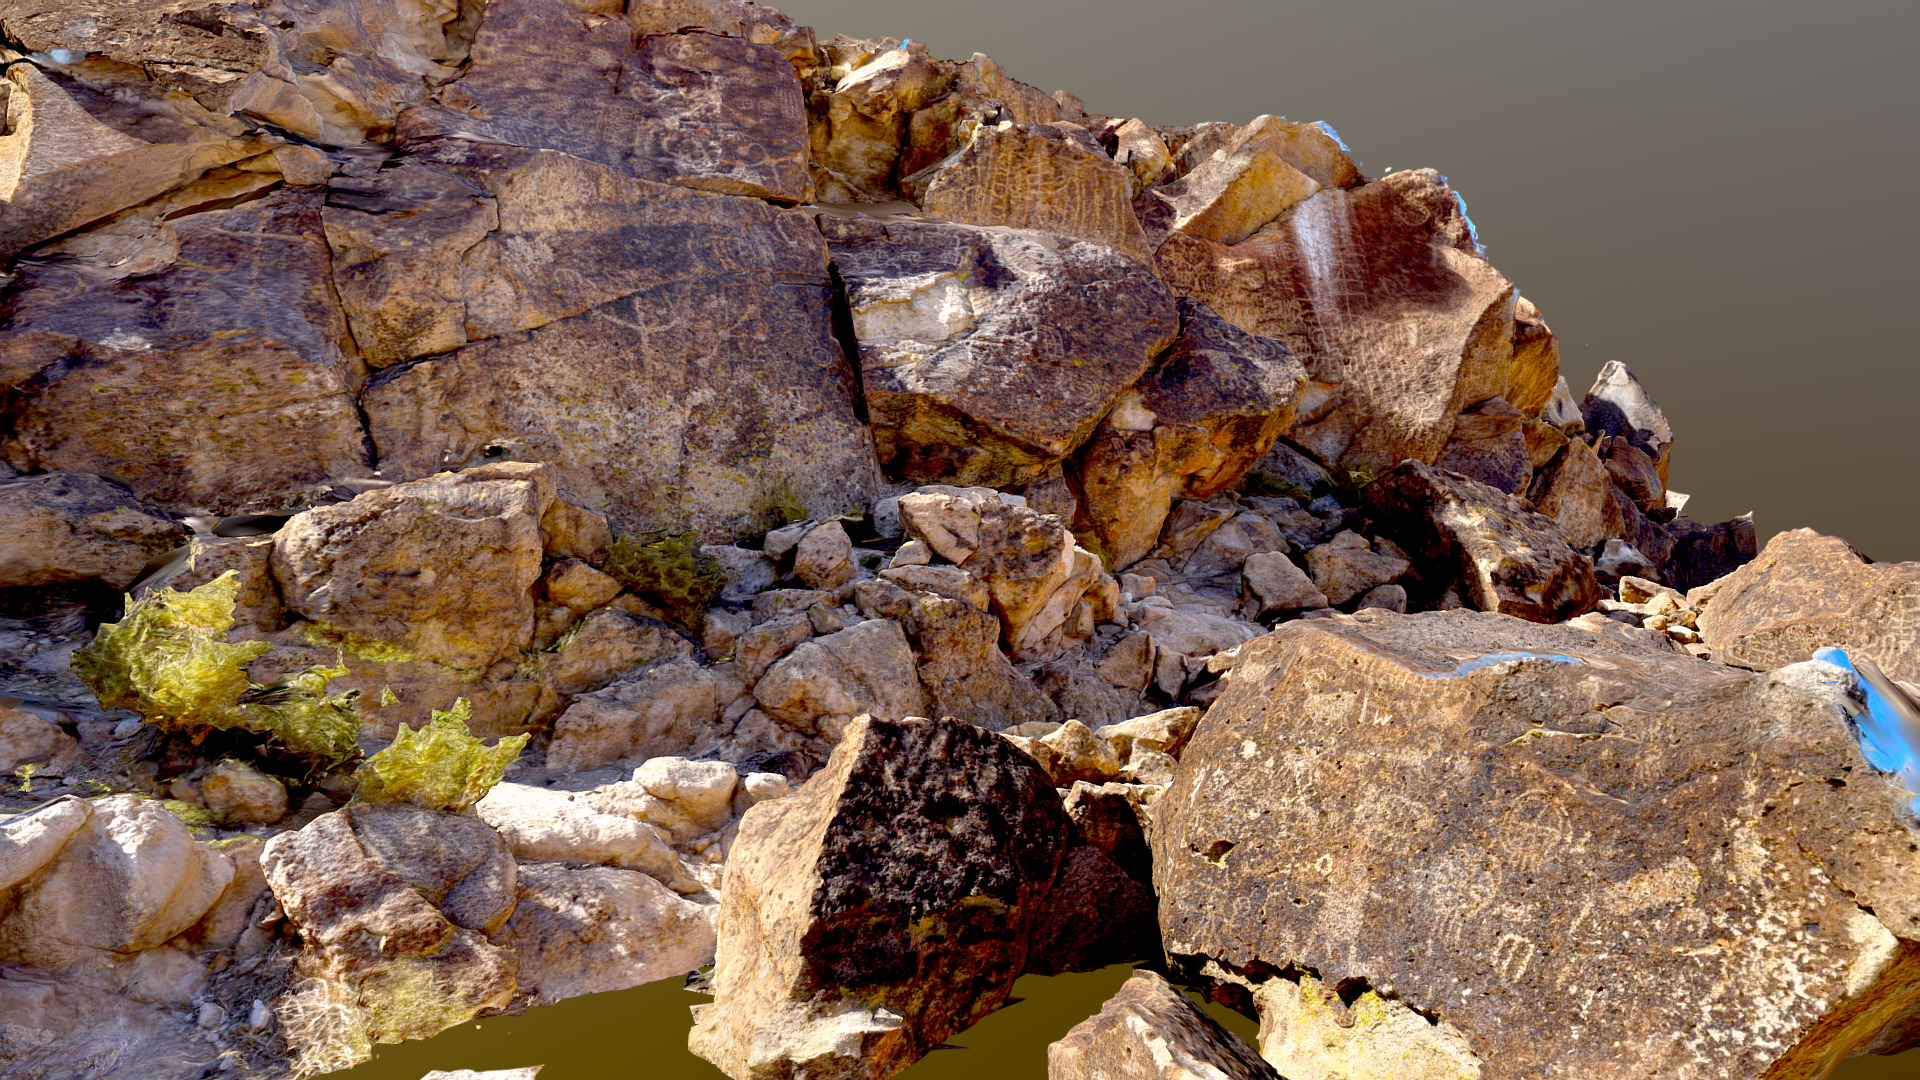 3D model Owens Valley Petroglyphs - This is a 3D model of the Owens Valley Petroglyphs. The 3D model is about a stream of water with rocks.